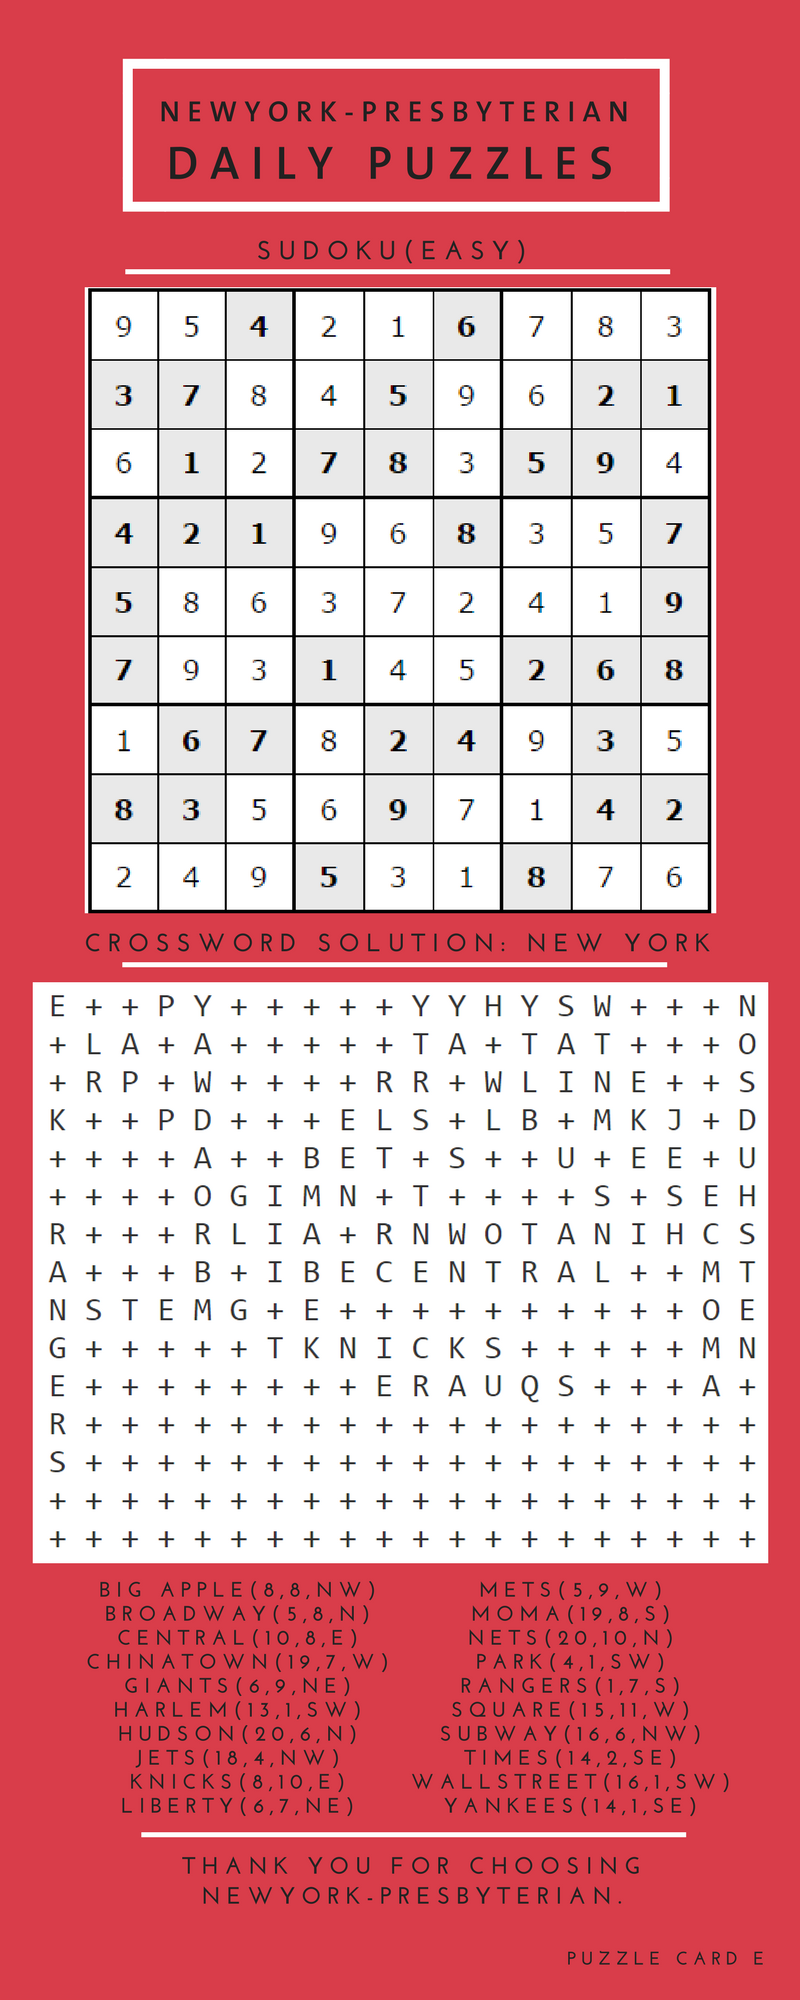 Daily Puzzle Card D